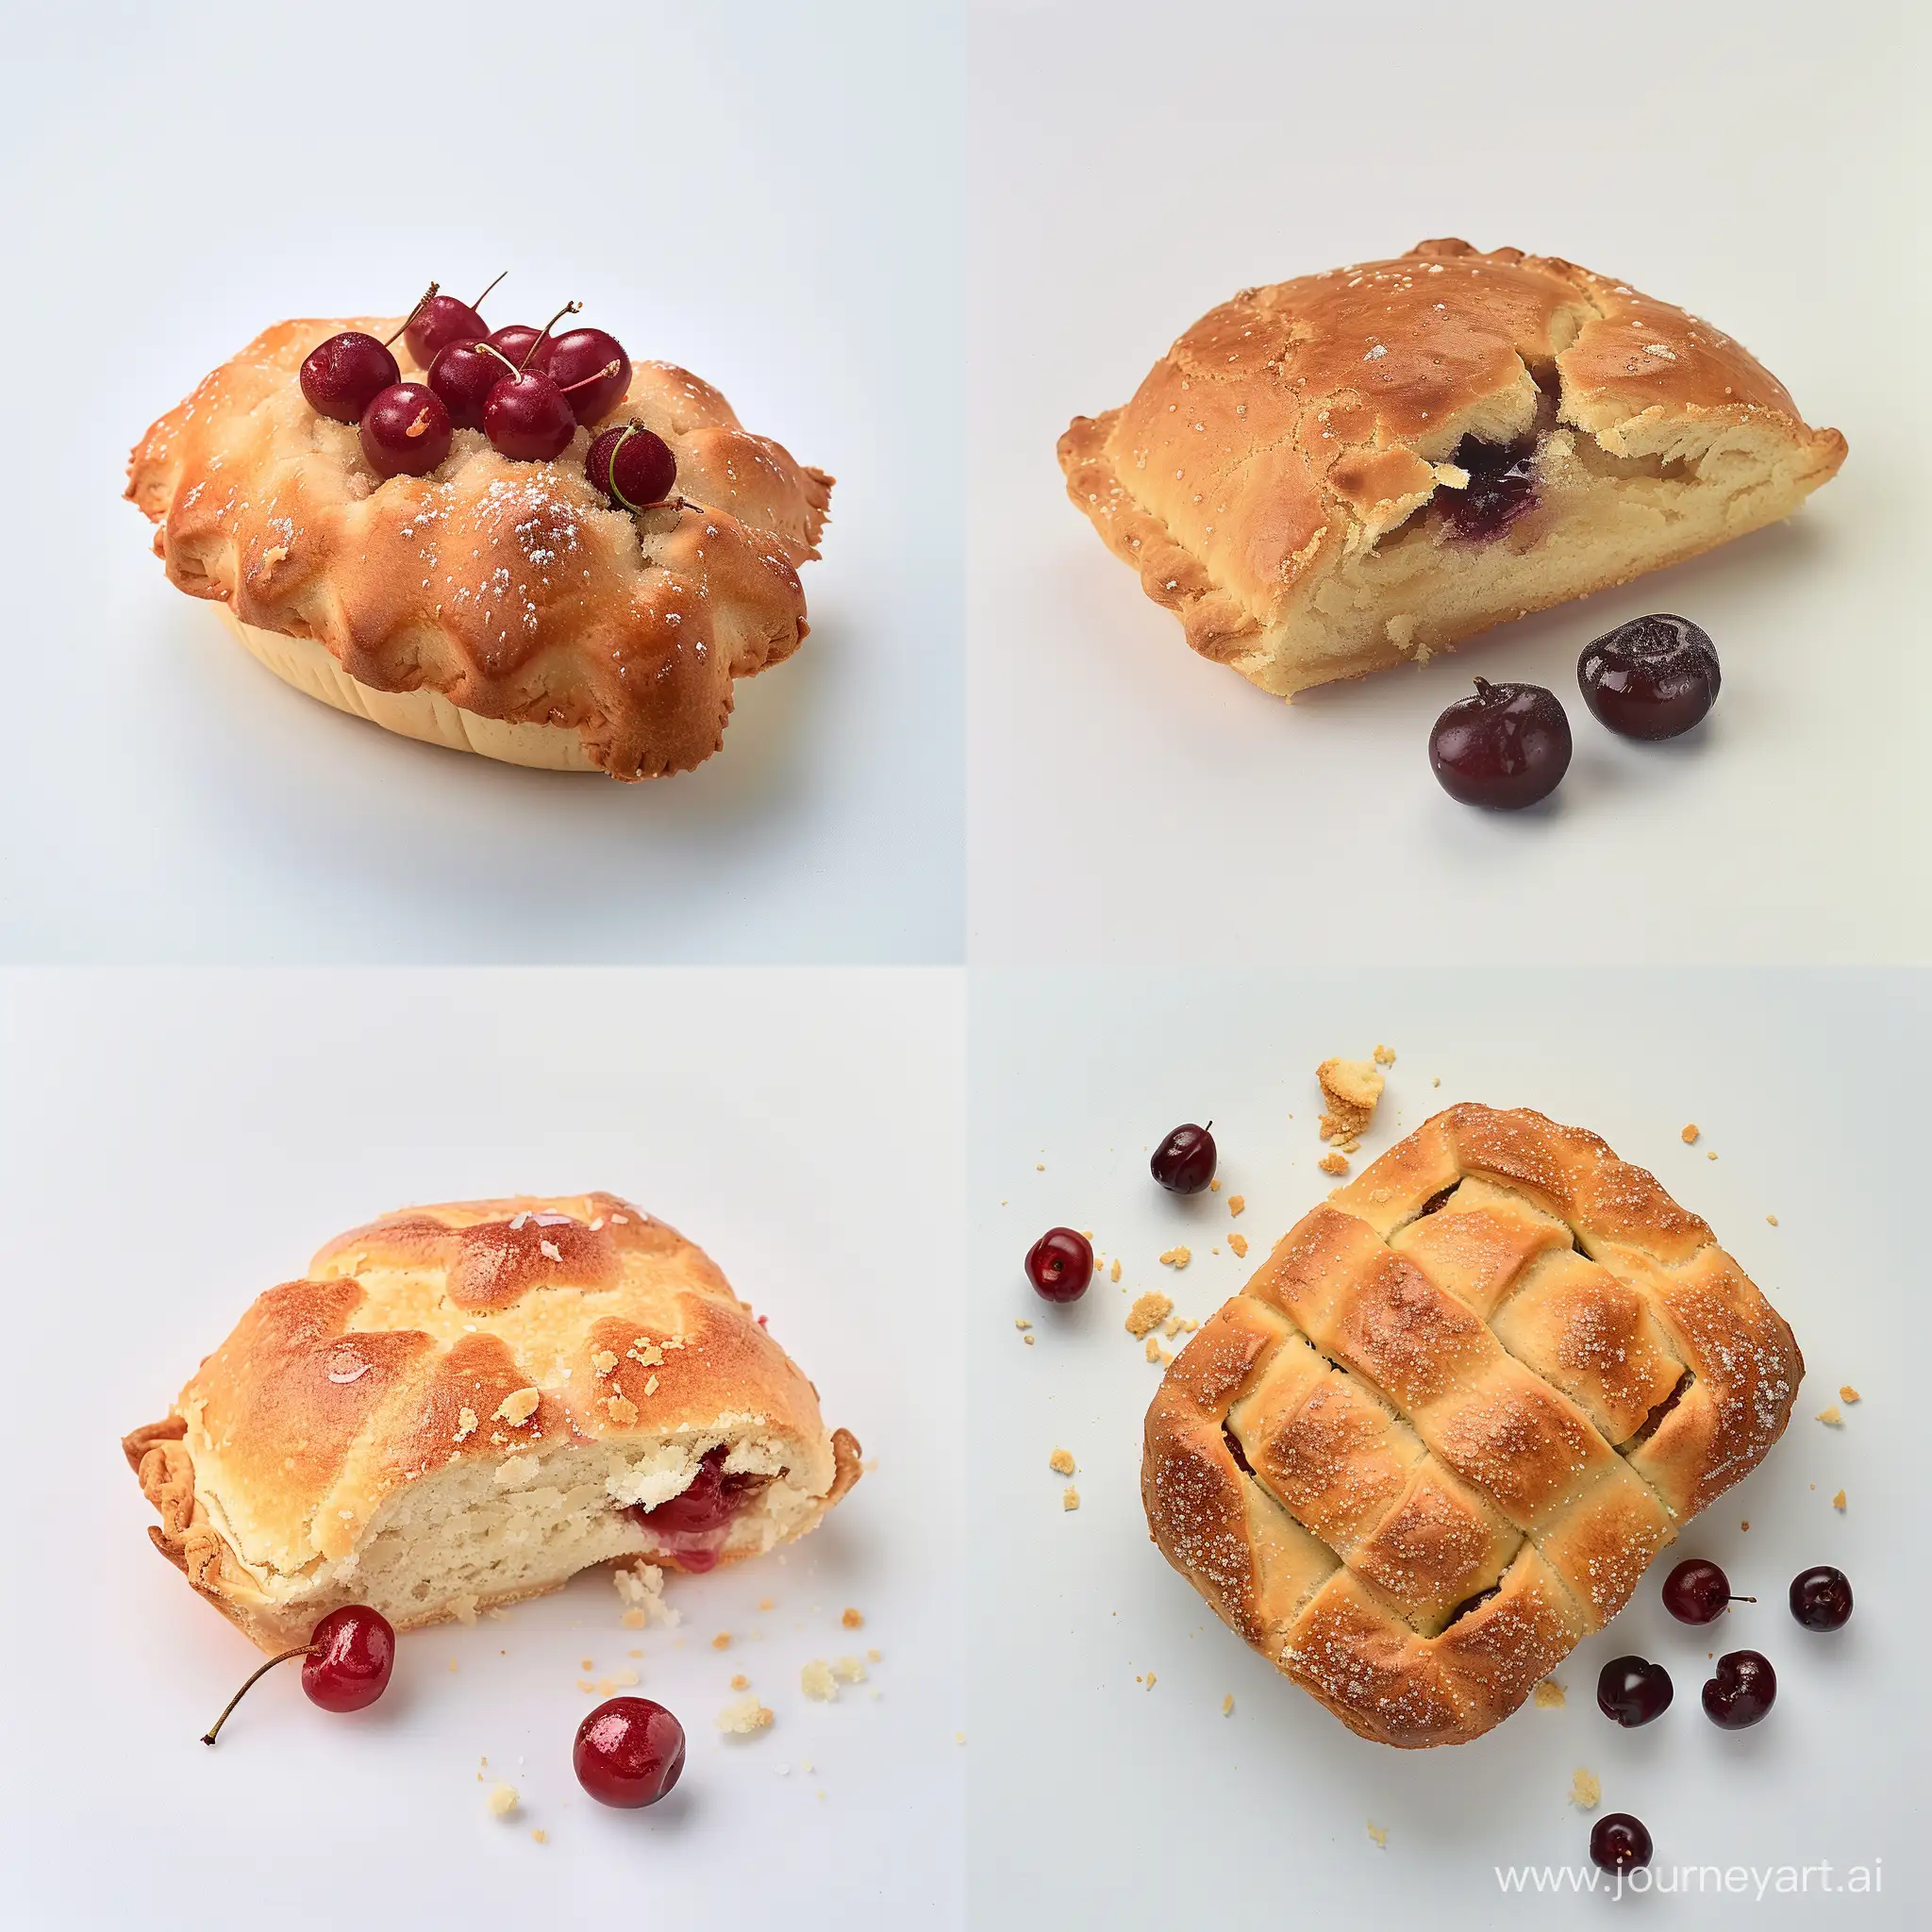 Delicious-Cherry-Pies-Studio-Shot-with-Canon-Digital-SLR-and-Natural-Lighting